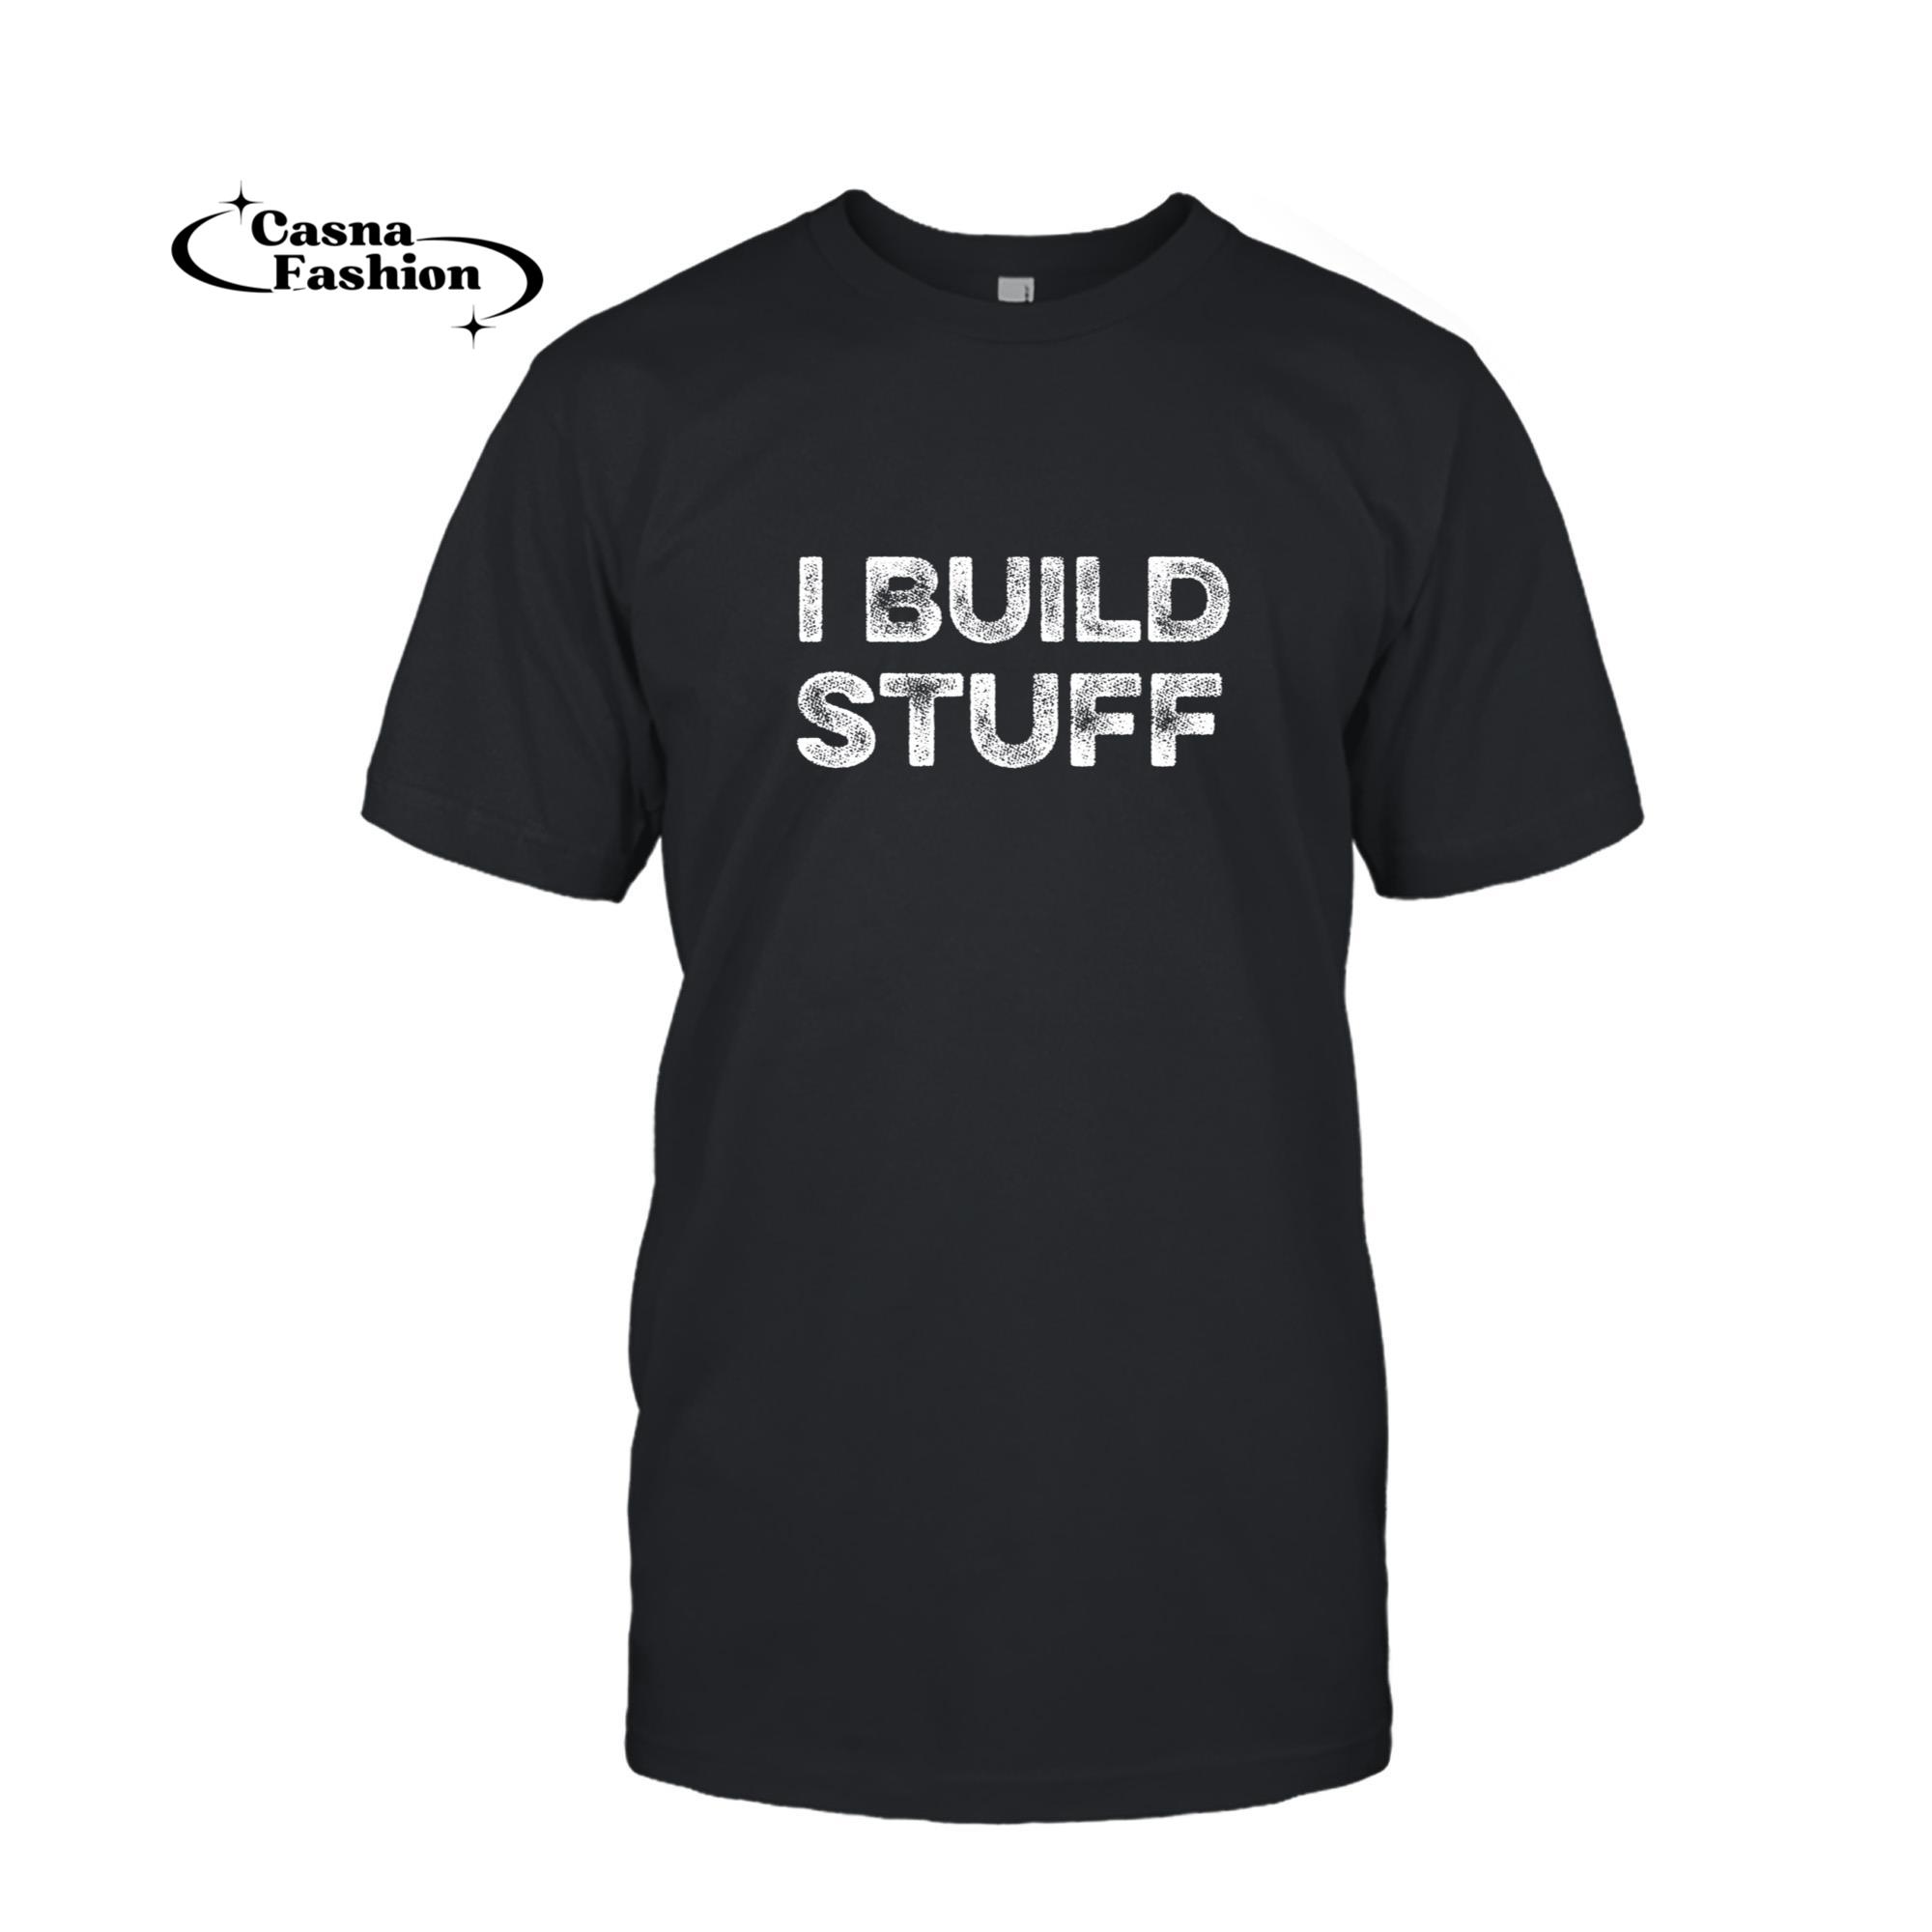 casnafashion_T-shirt_I Build Stuff Funny Builder Engineer Contractor Construction Pullover Hoodie_T-shirt_Black